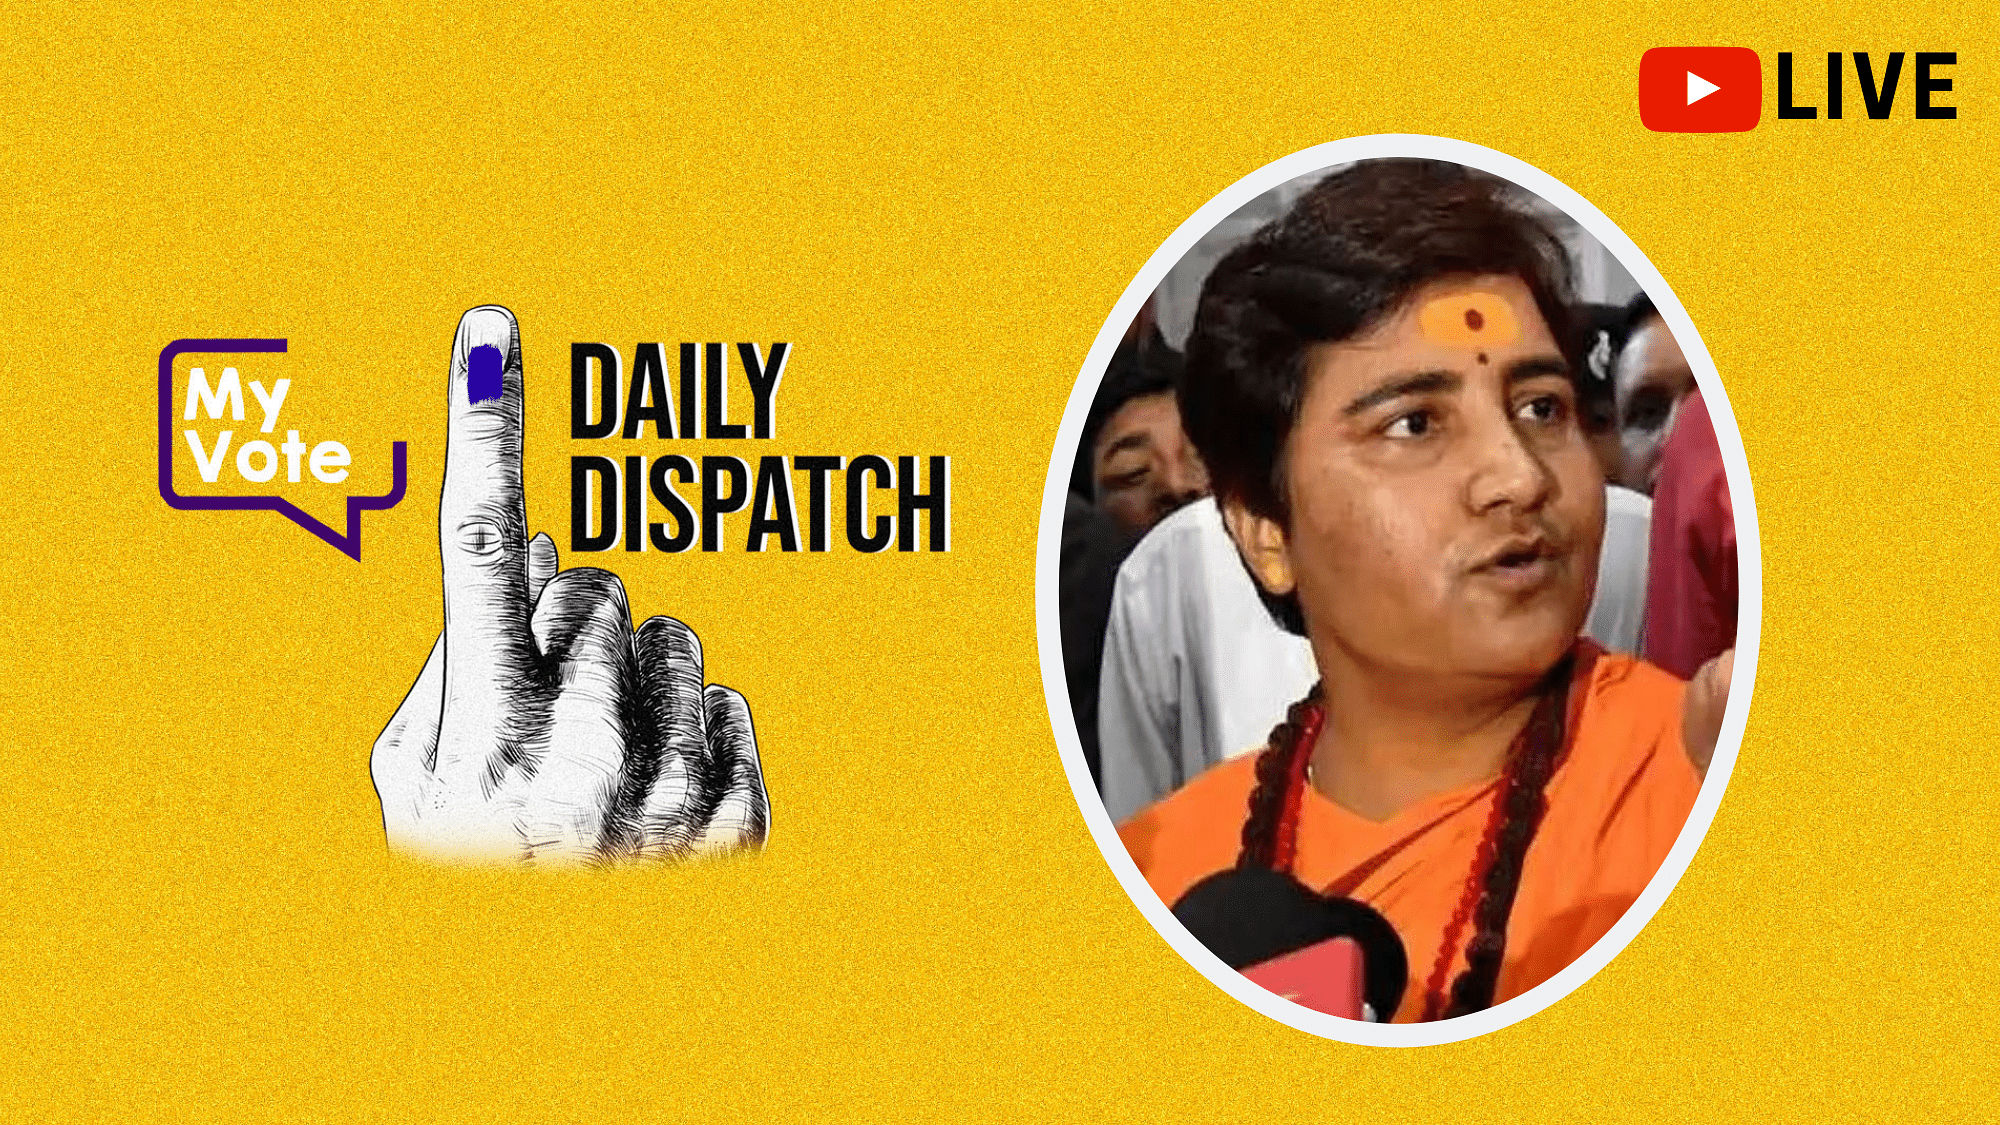 Catch the day’s big election news only on Daily Dispatch.